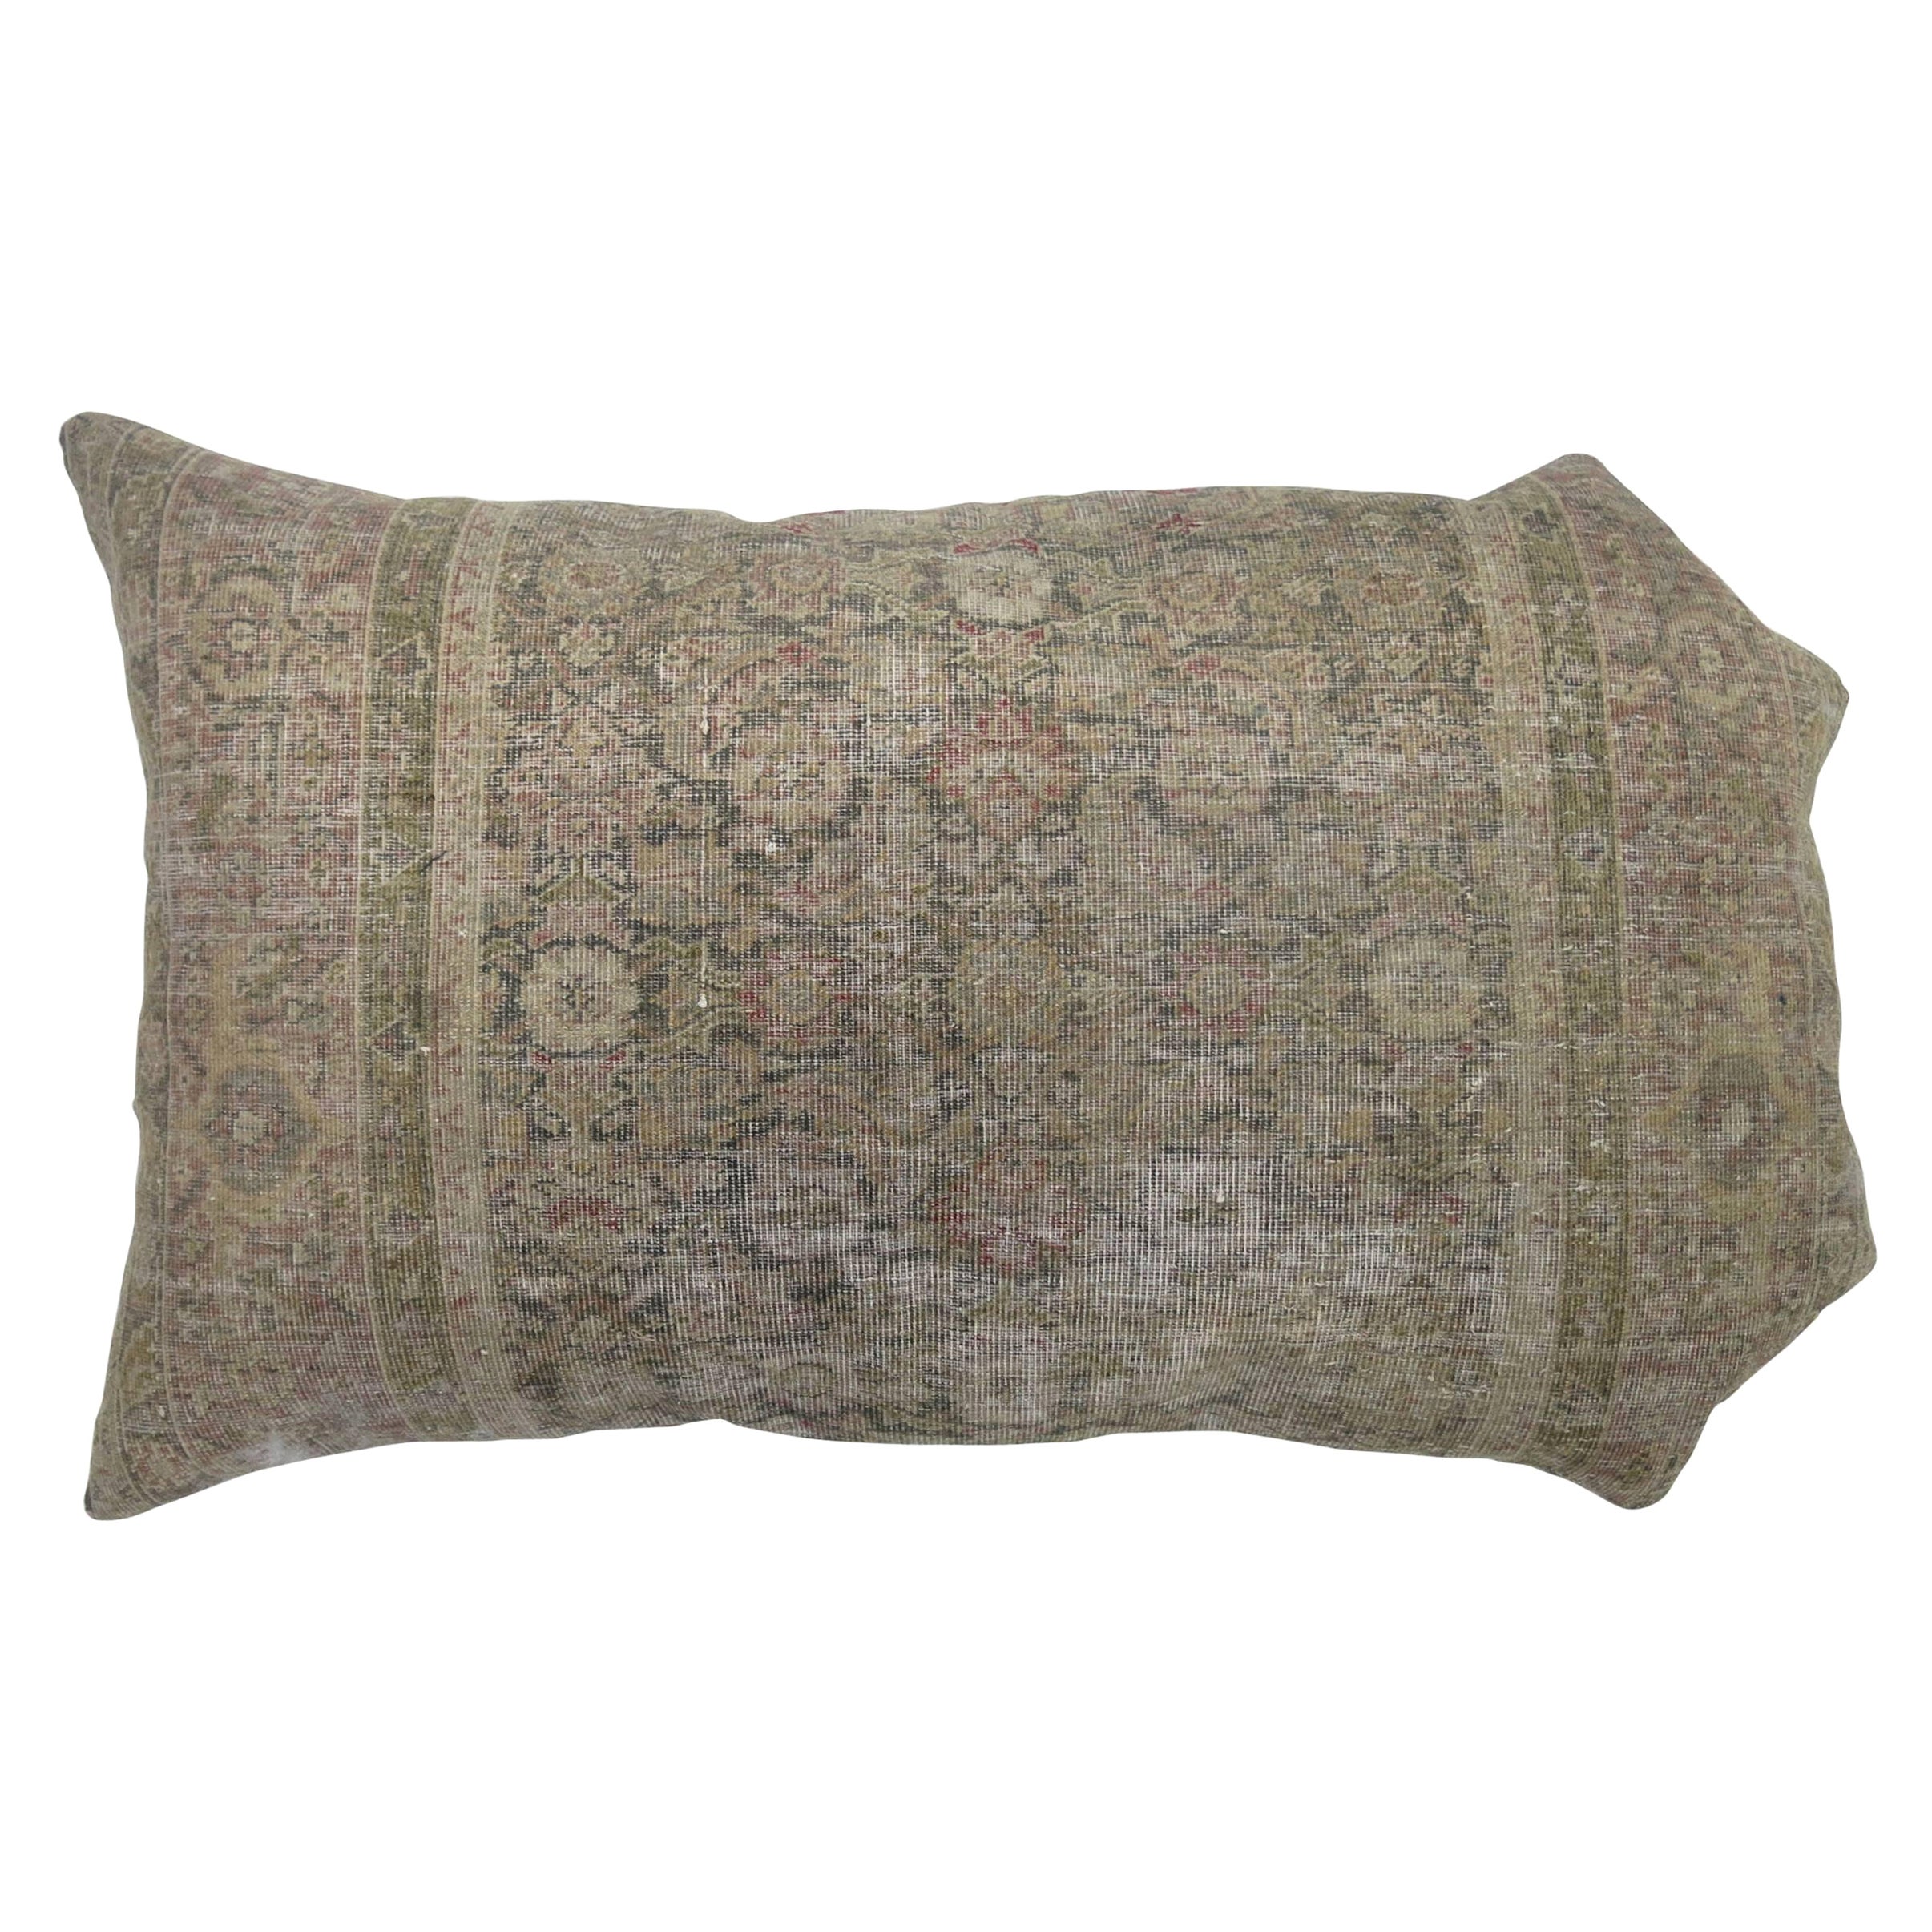 Curvilinear Shaped Antique Persian Malayer Rug Pillow